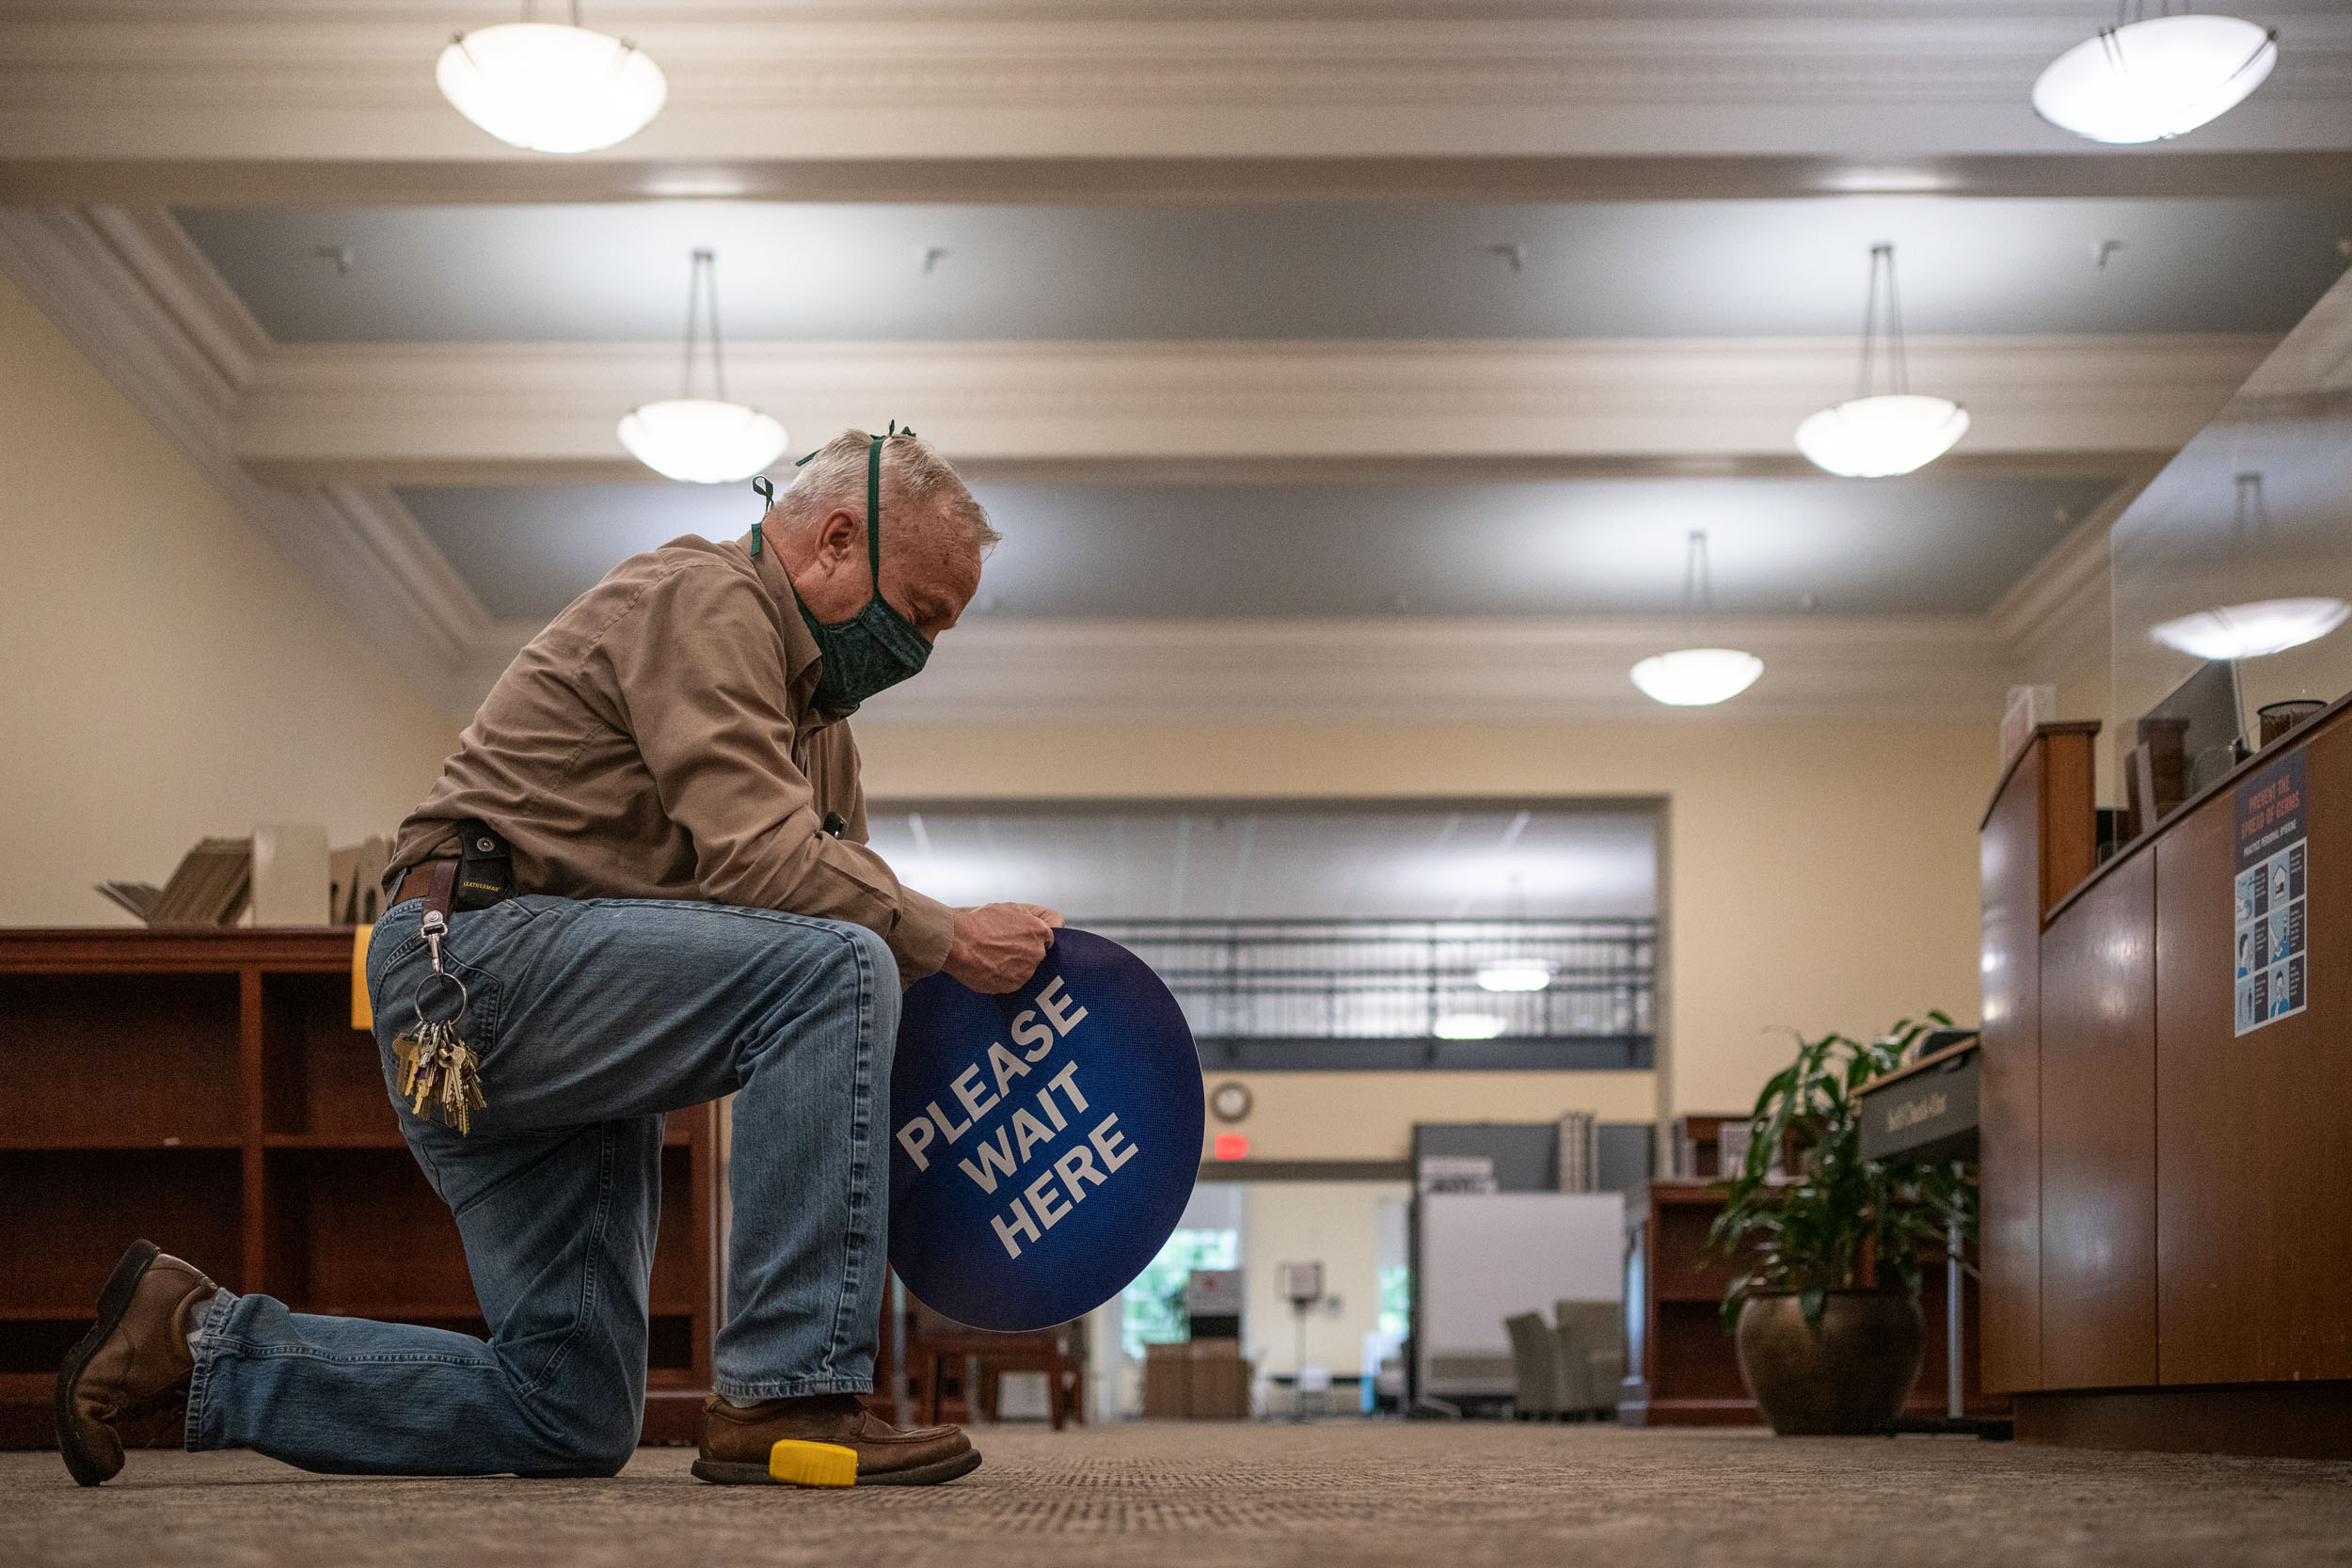 Guy Mengel working on placing a Please Wait Here sticker on the floor